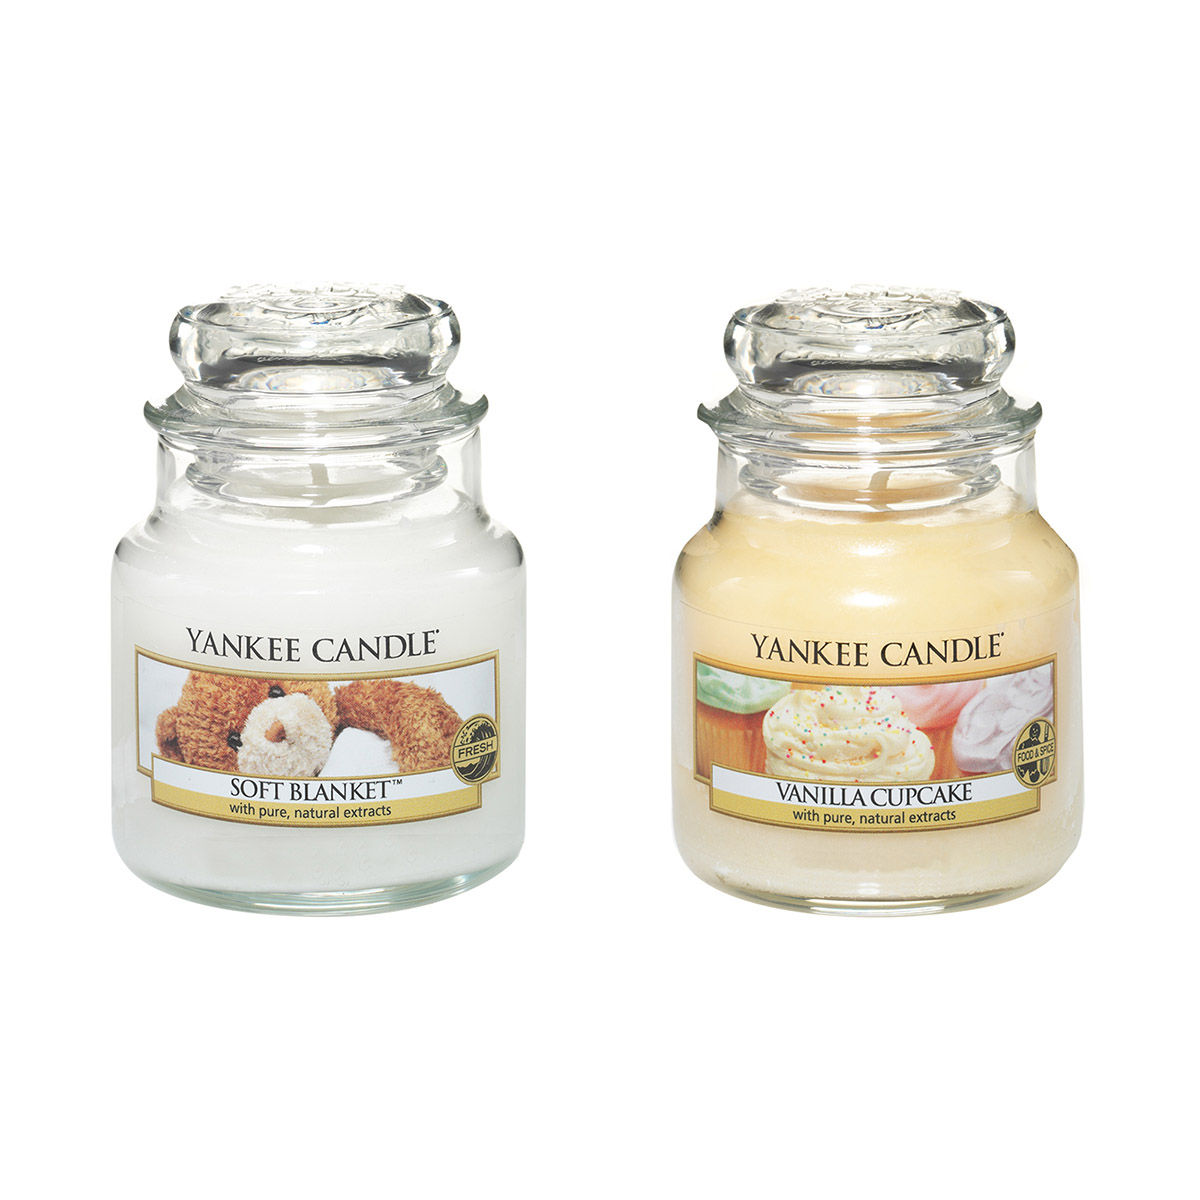 Yankee Candle Classic Jar Scented Candles - Pack of 2 - Soft Blanket and Vanilla Cupcake